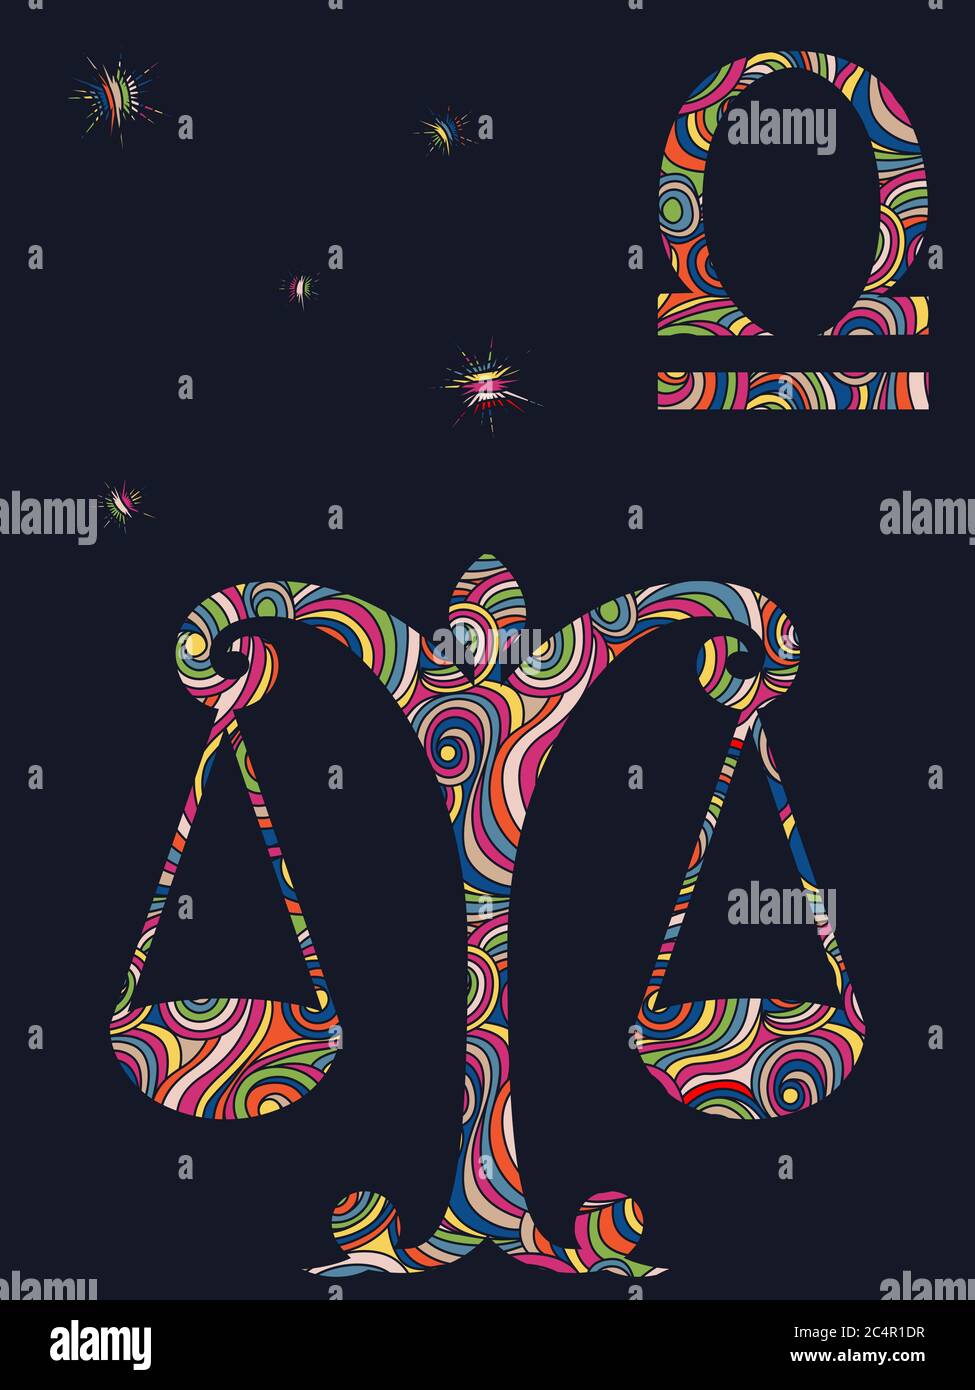 Zodiac sign Libra fill with colorful muted wavy shapes on the dark gray background with stars and astrological symbols, vector illustration Stock Vector